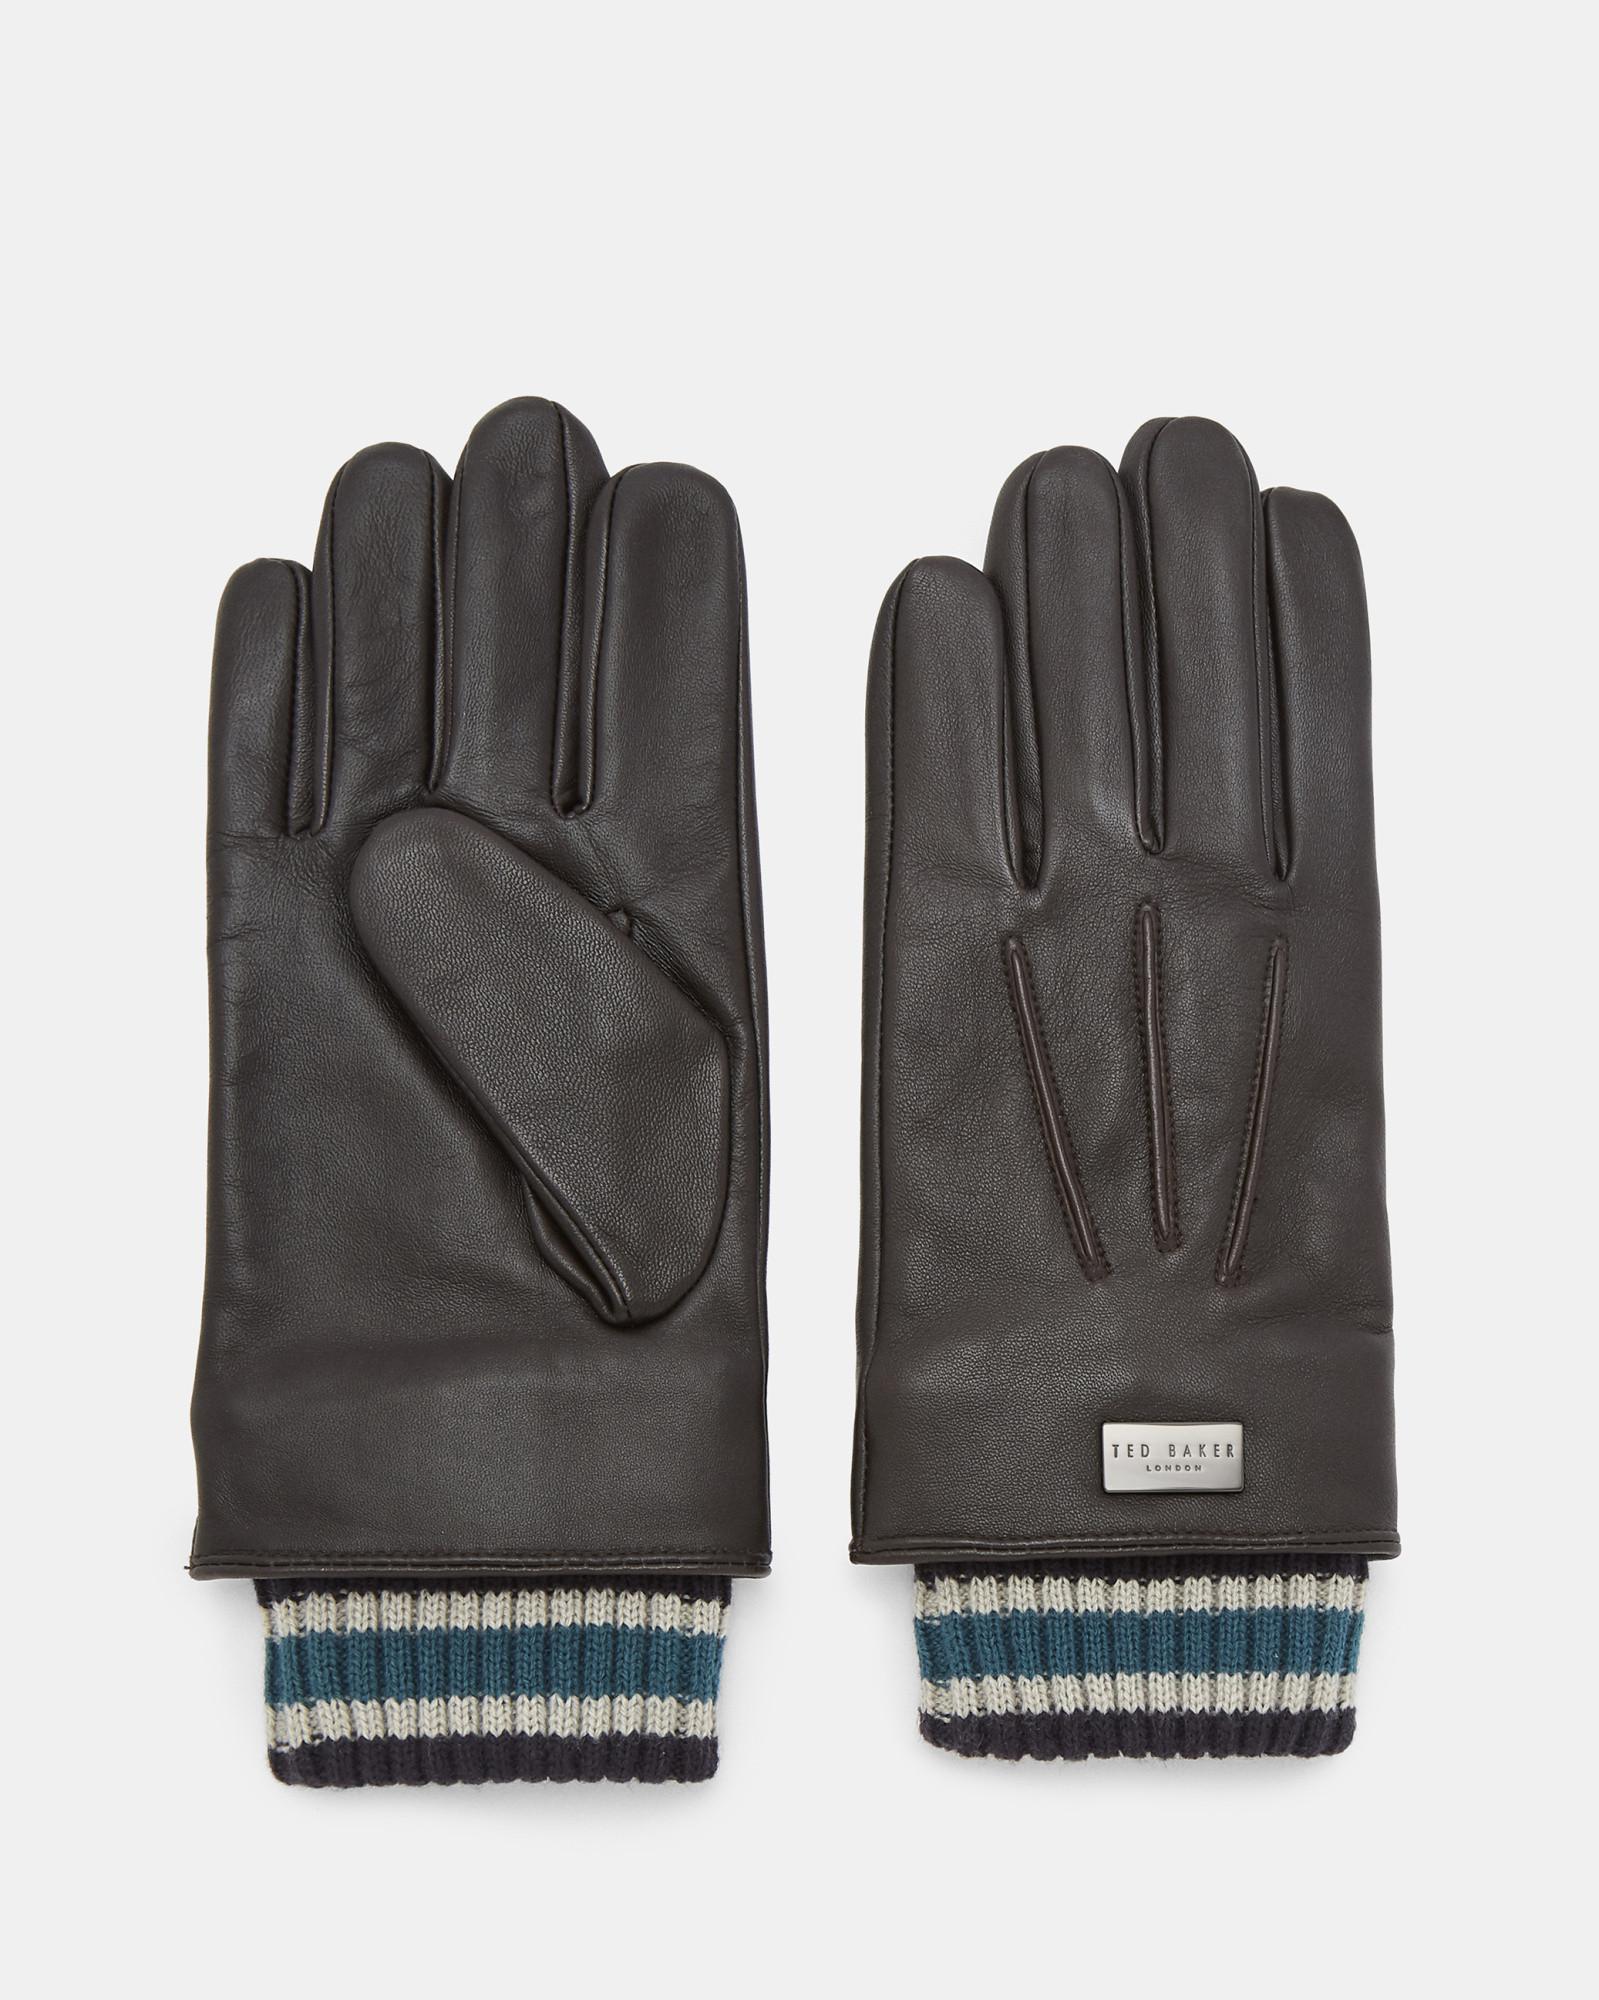 Ted Baker Ribbed Cuff Leather Gloves in Brown for Men - Lyst